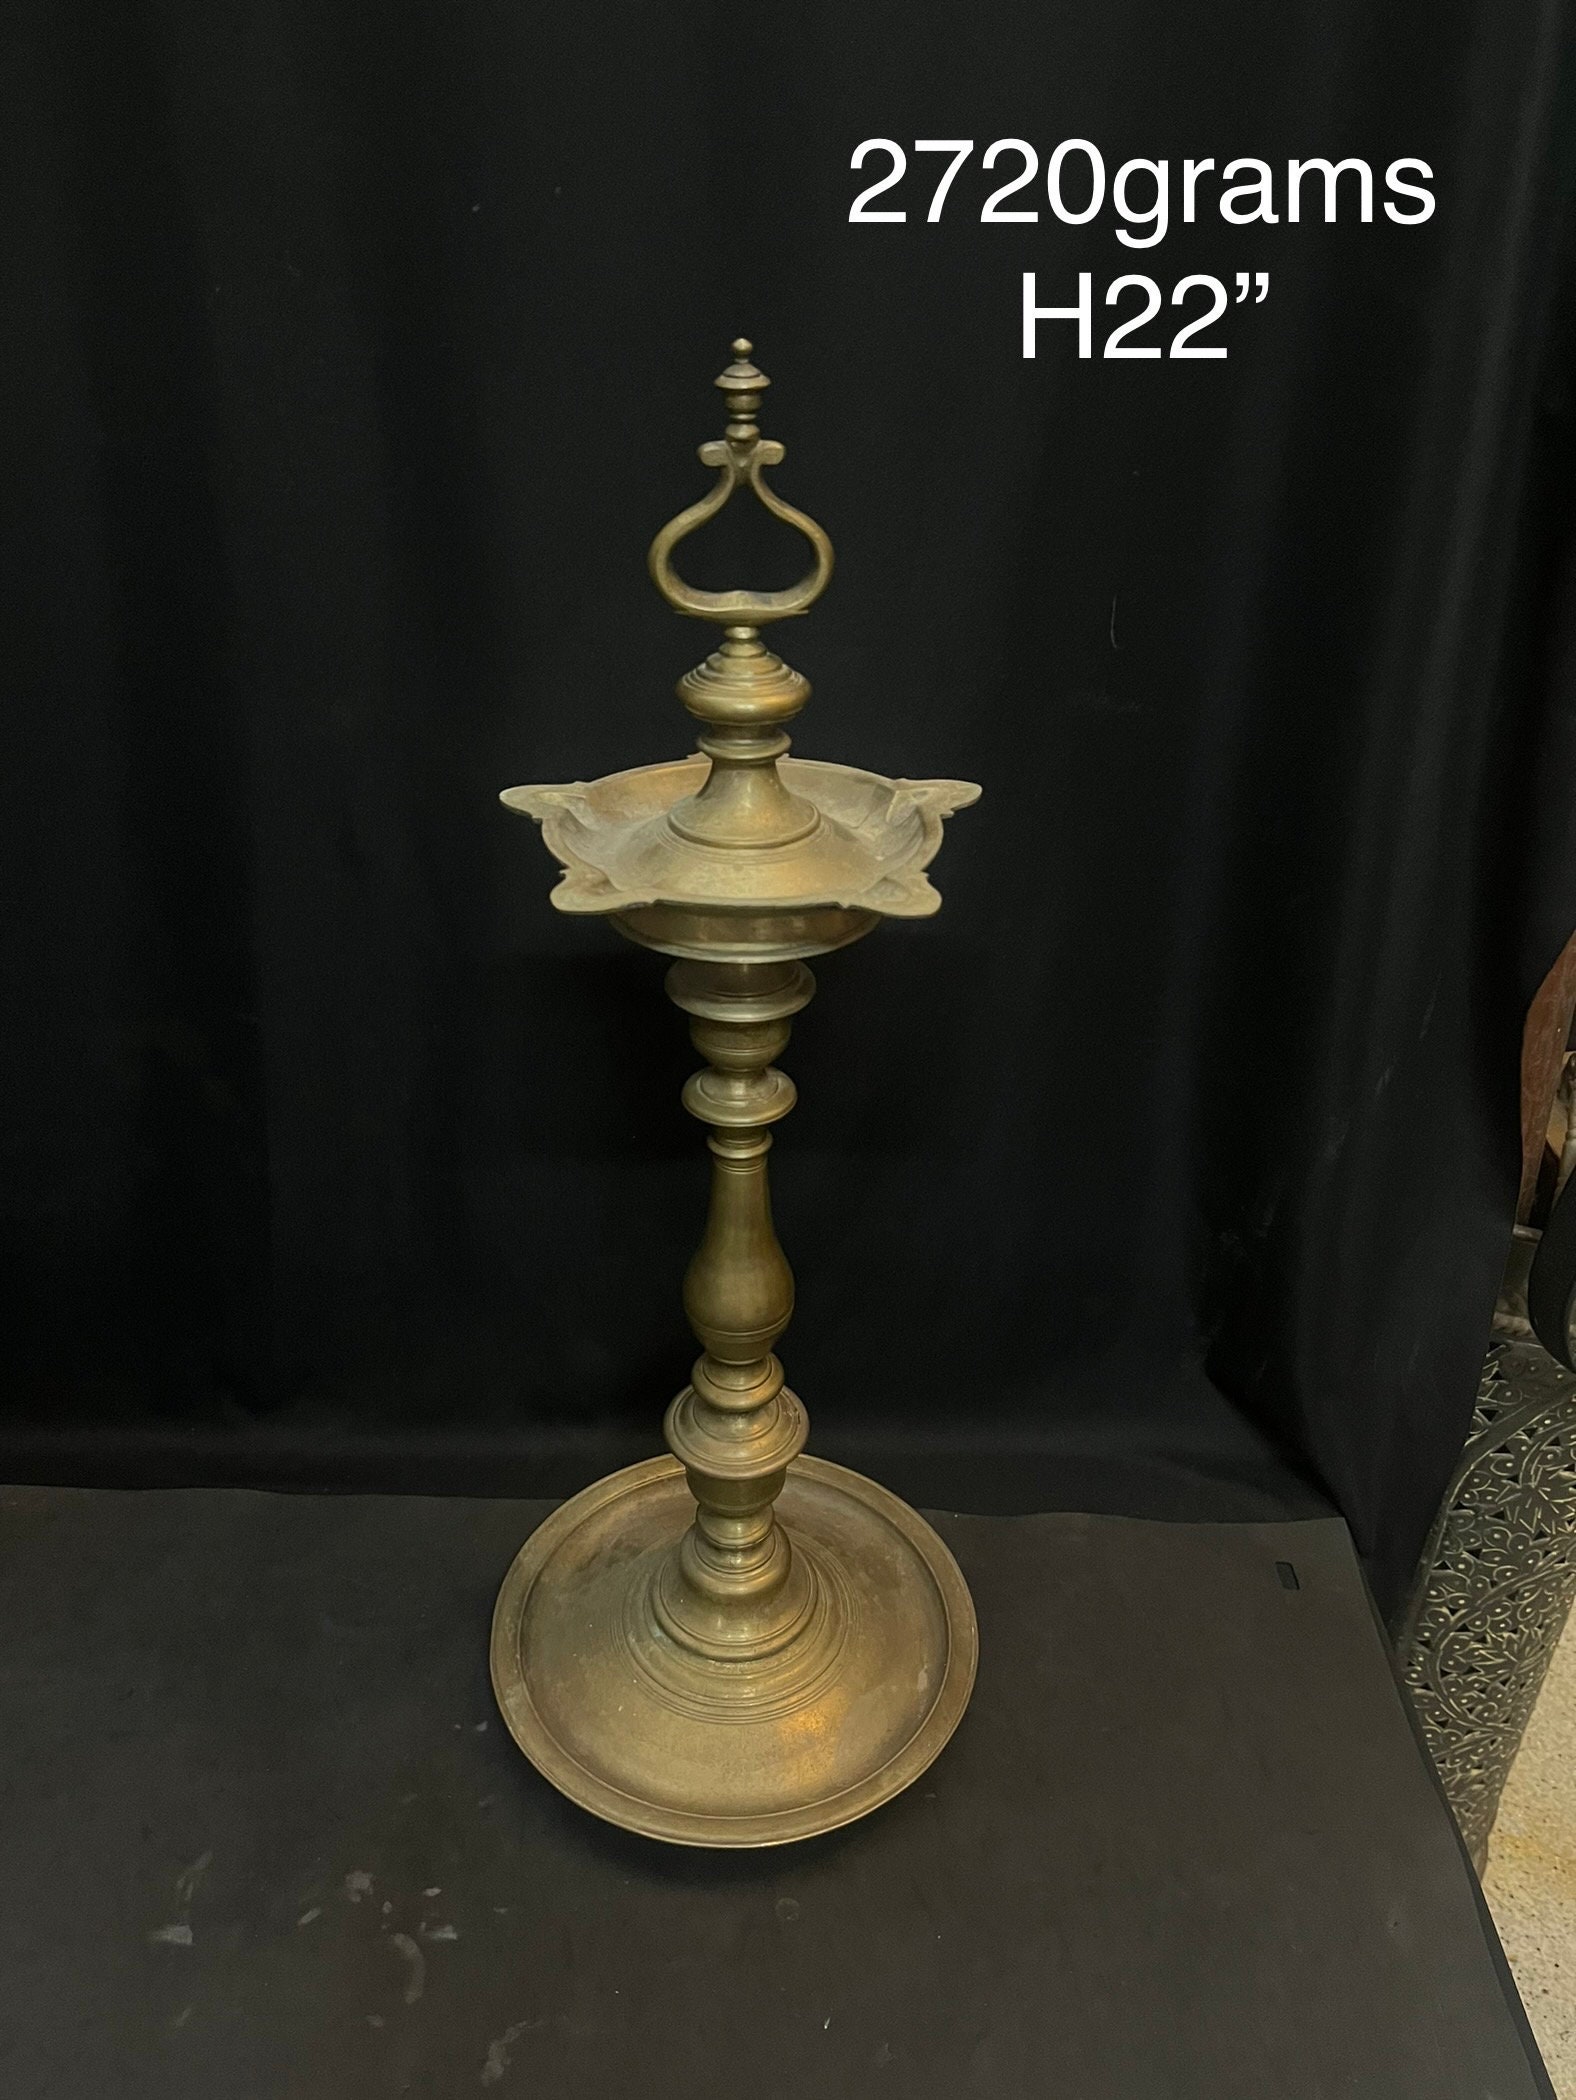 Vintage Oriental Oil Lamp Bronze Small Lamp Collectable Lamp